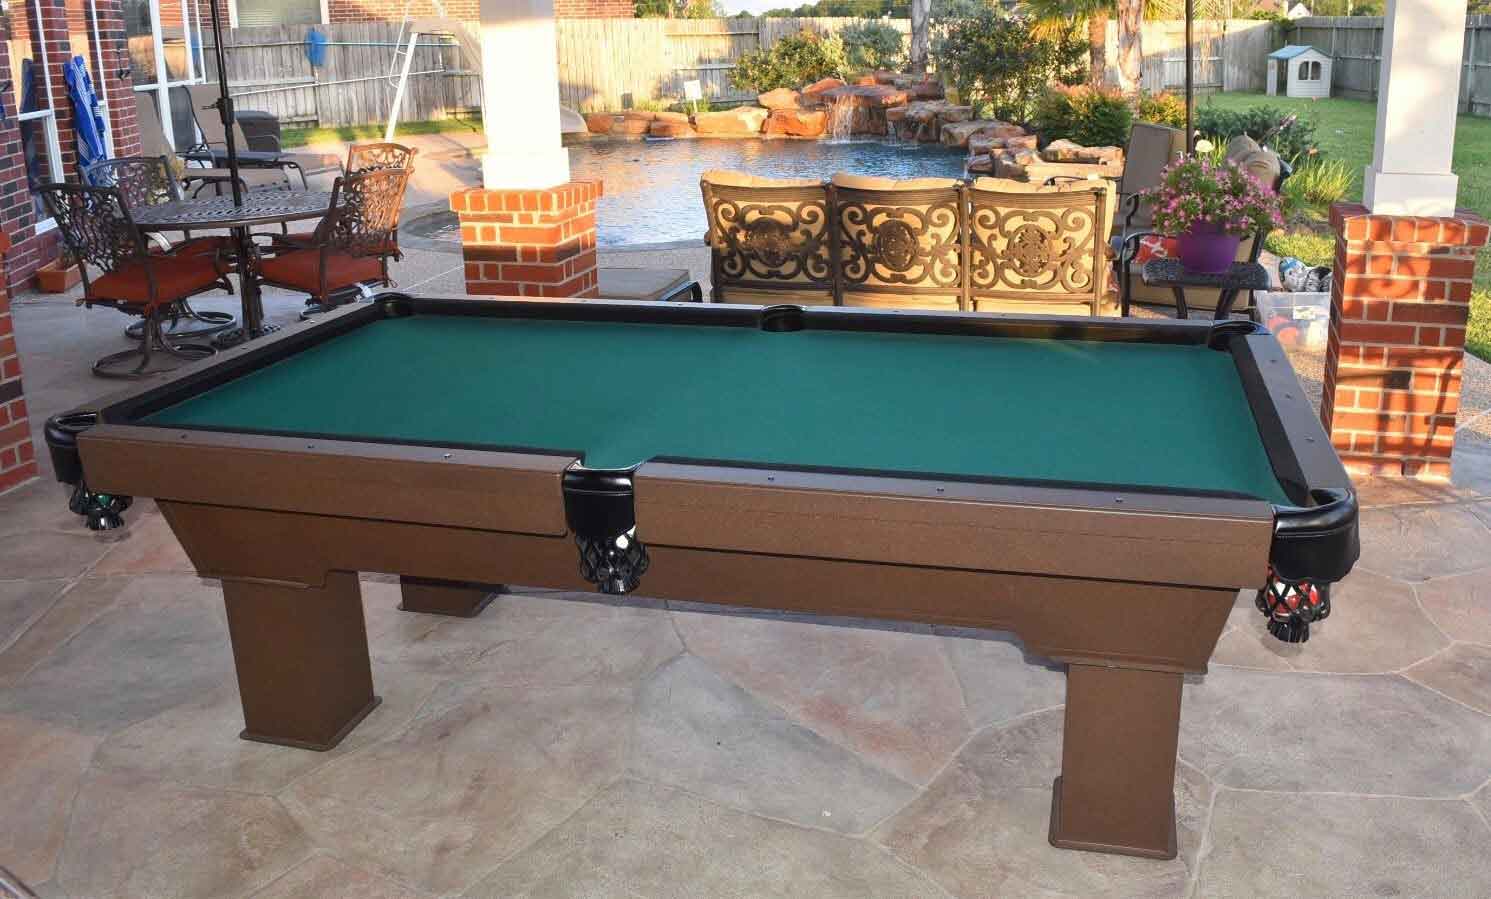 Caesar outdoor pool table in client's backyard